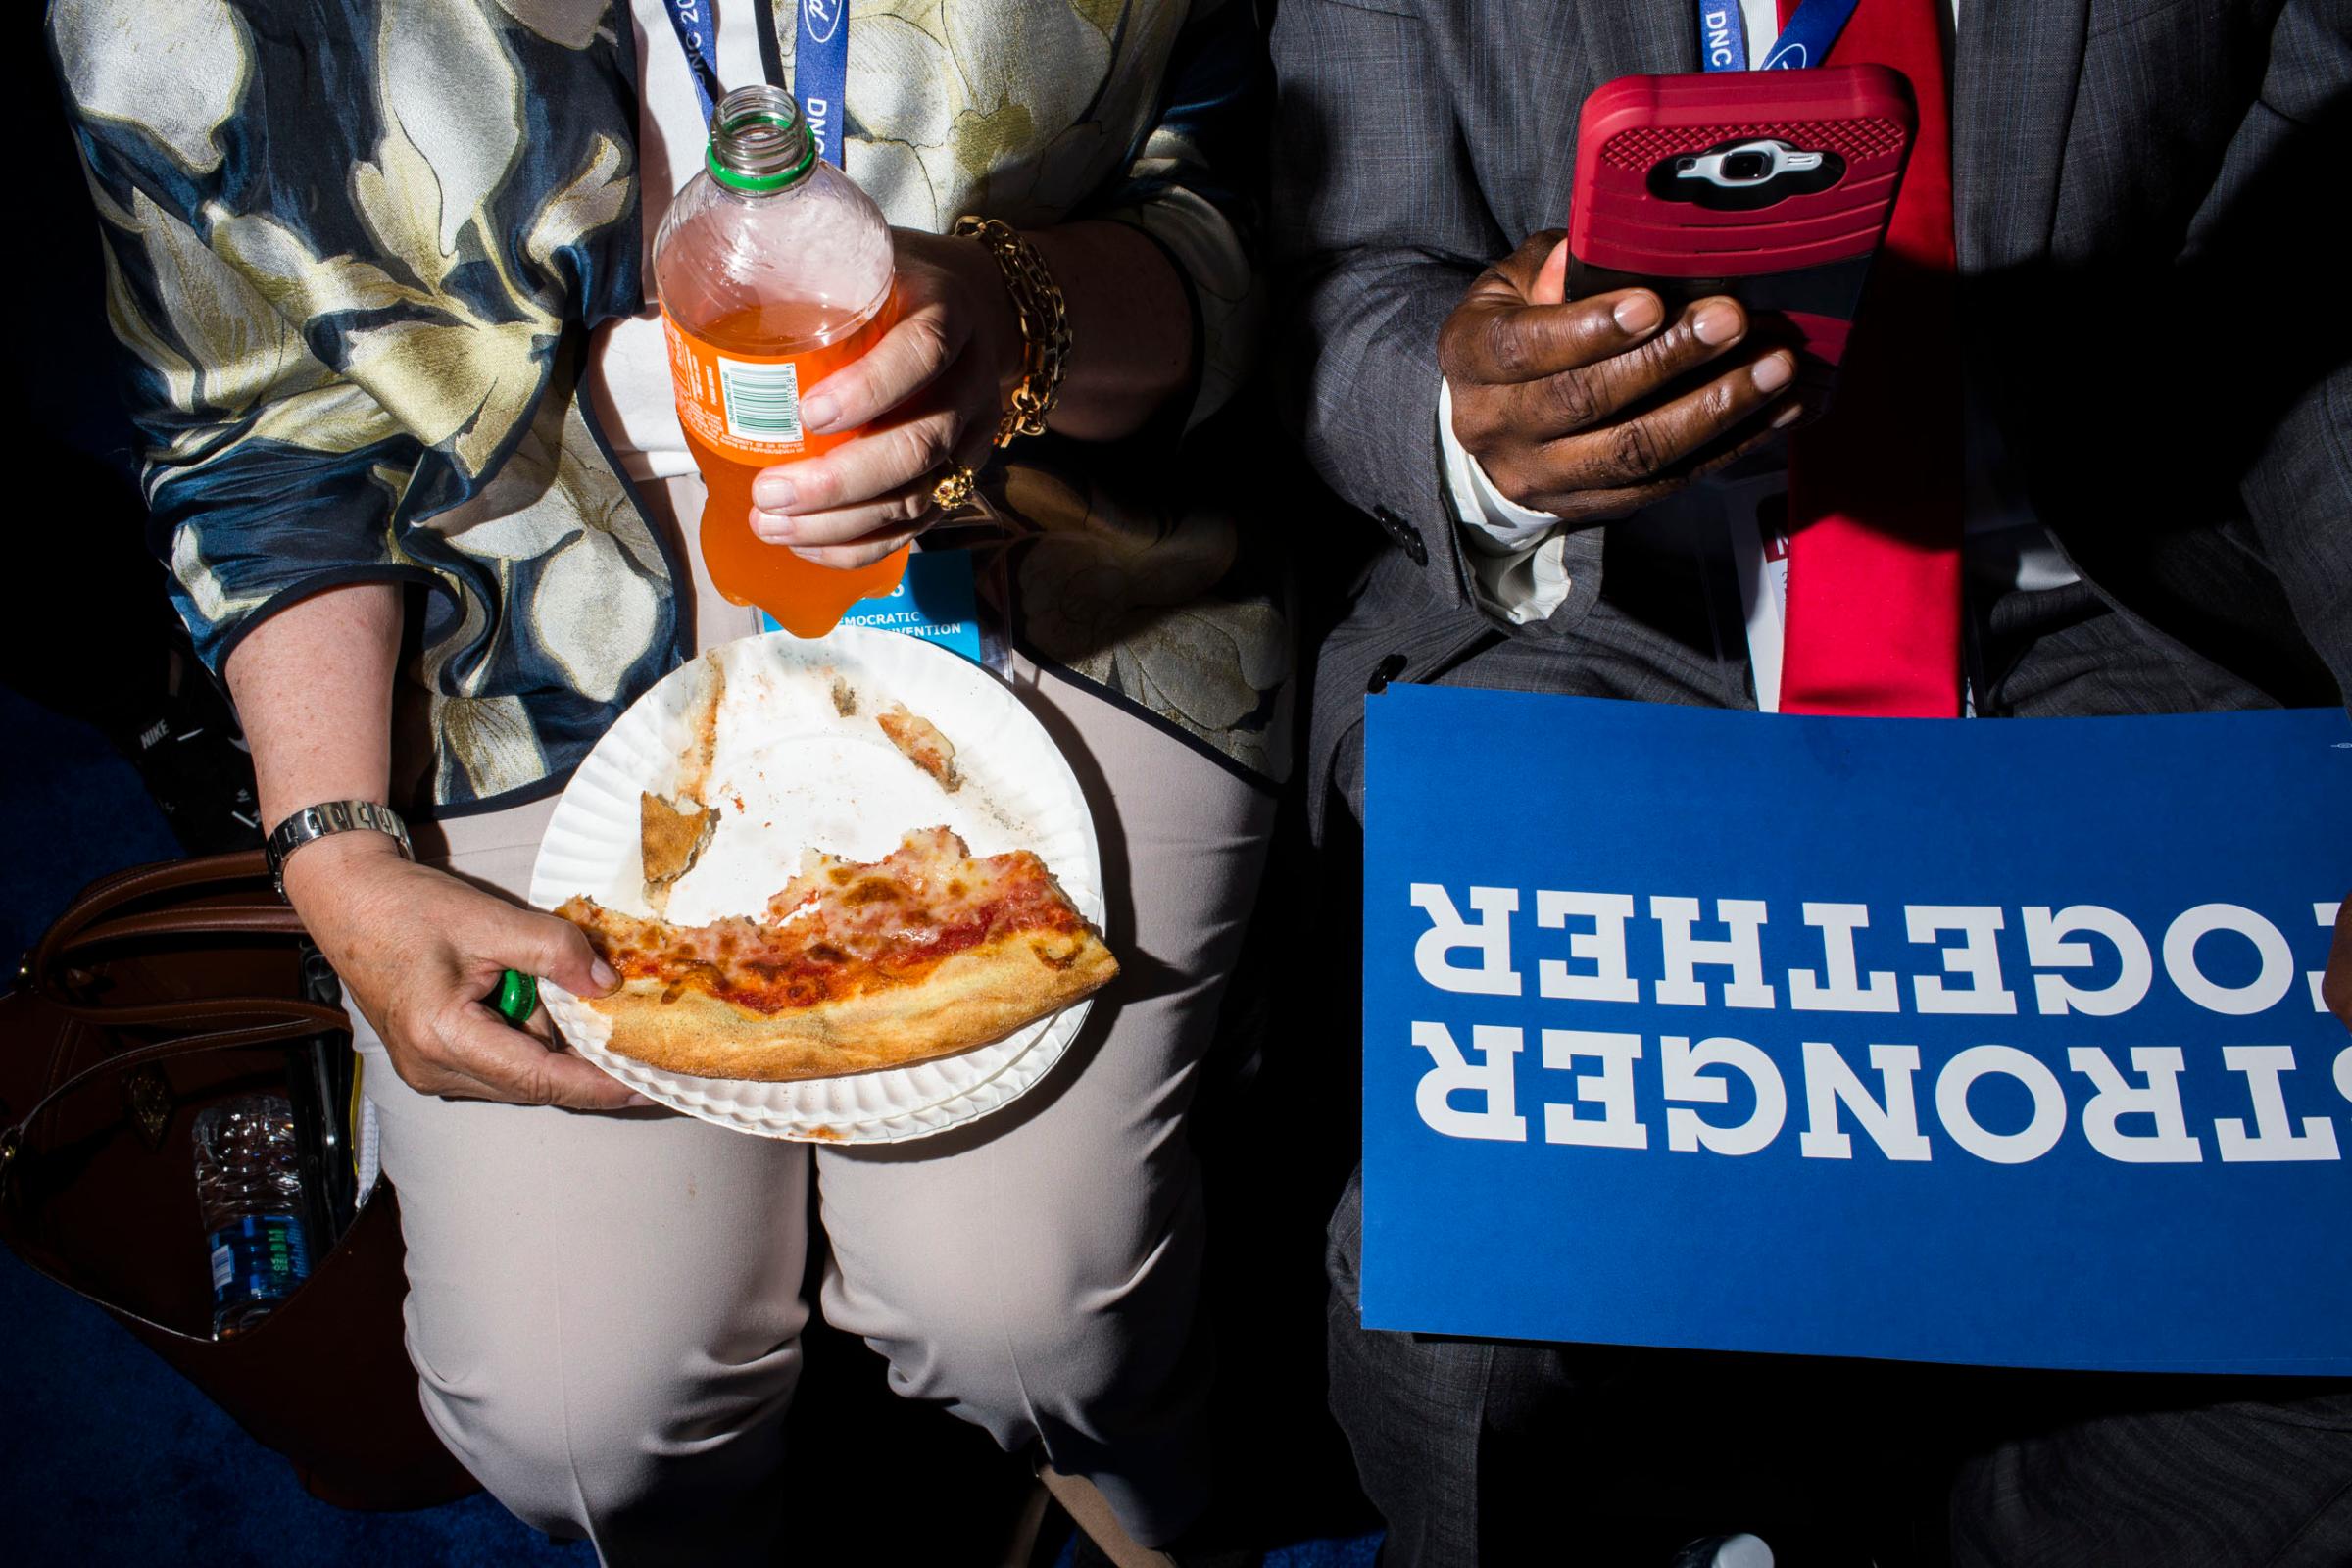 Pizza at the 2016 Democratic National Convention in Philadelphia on Monday, July 25, 2016.